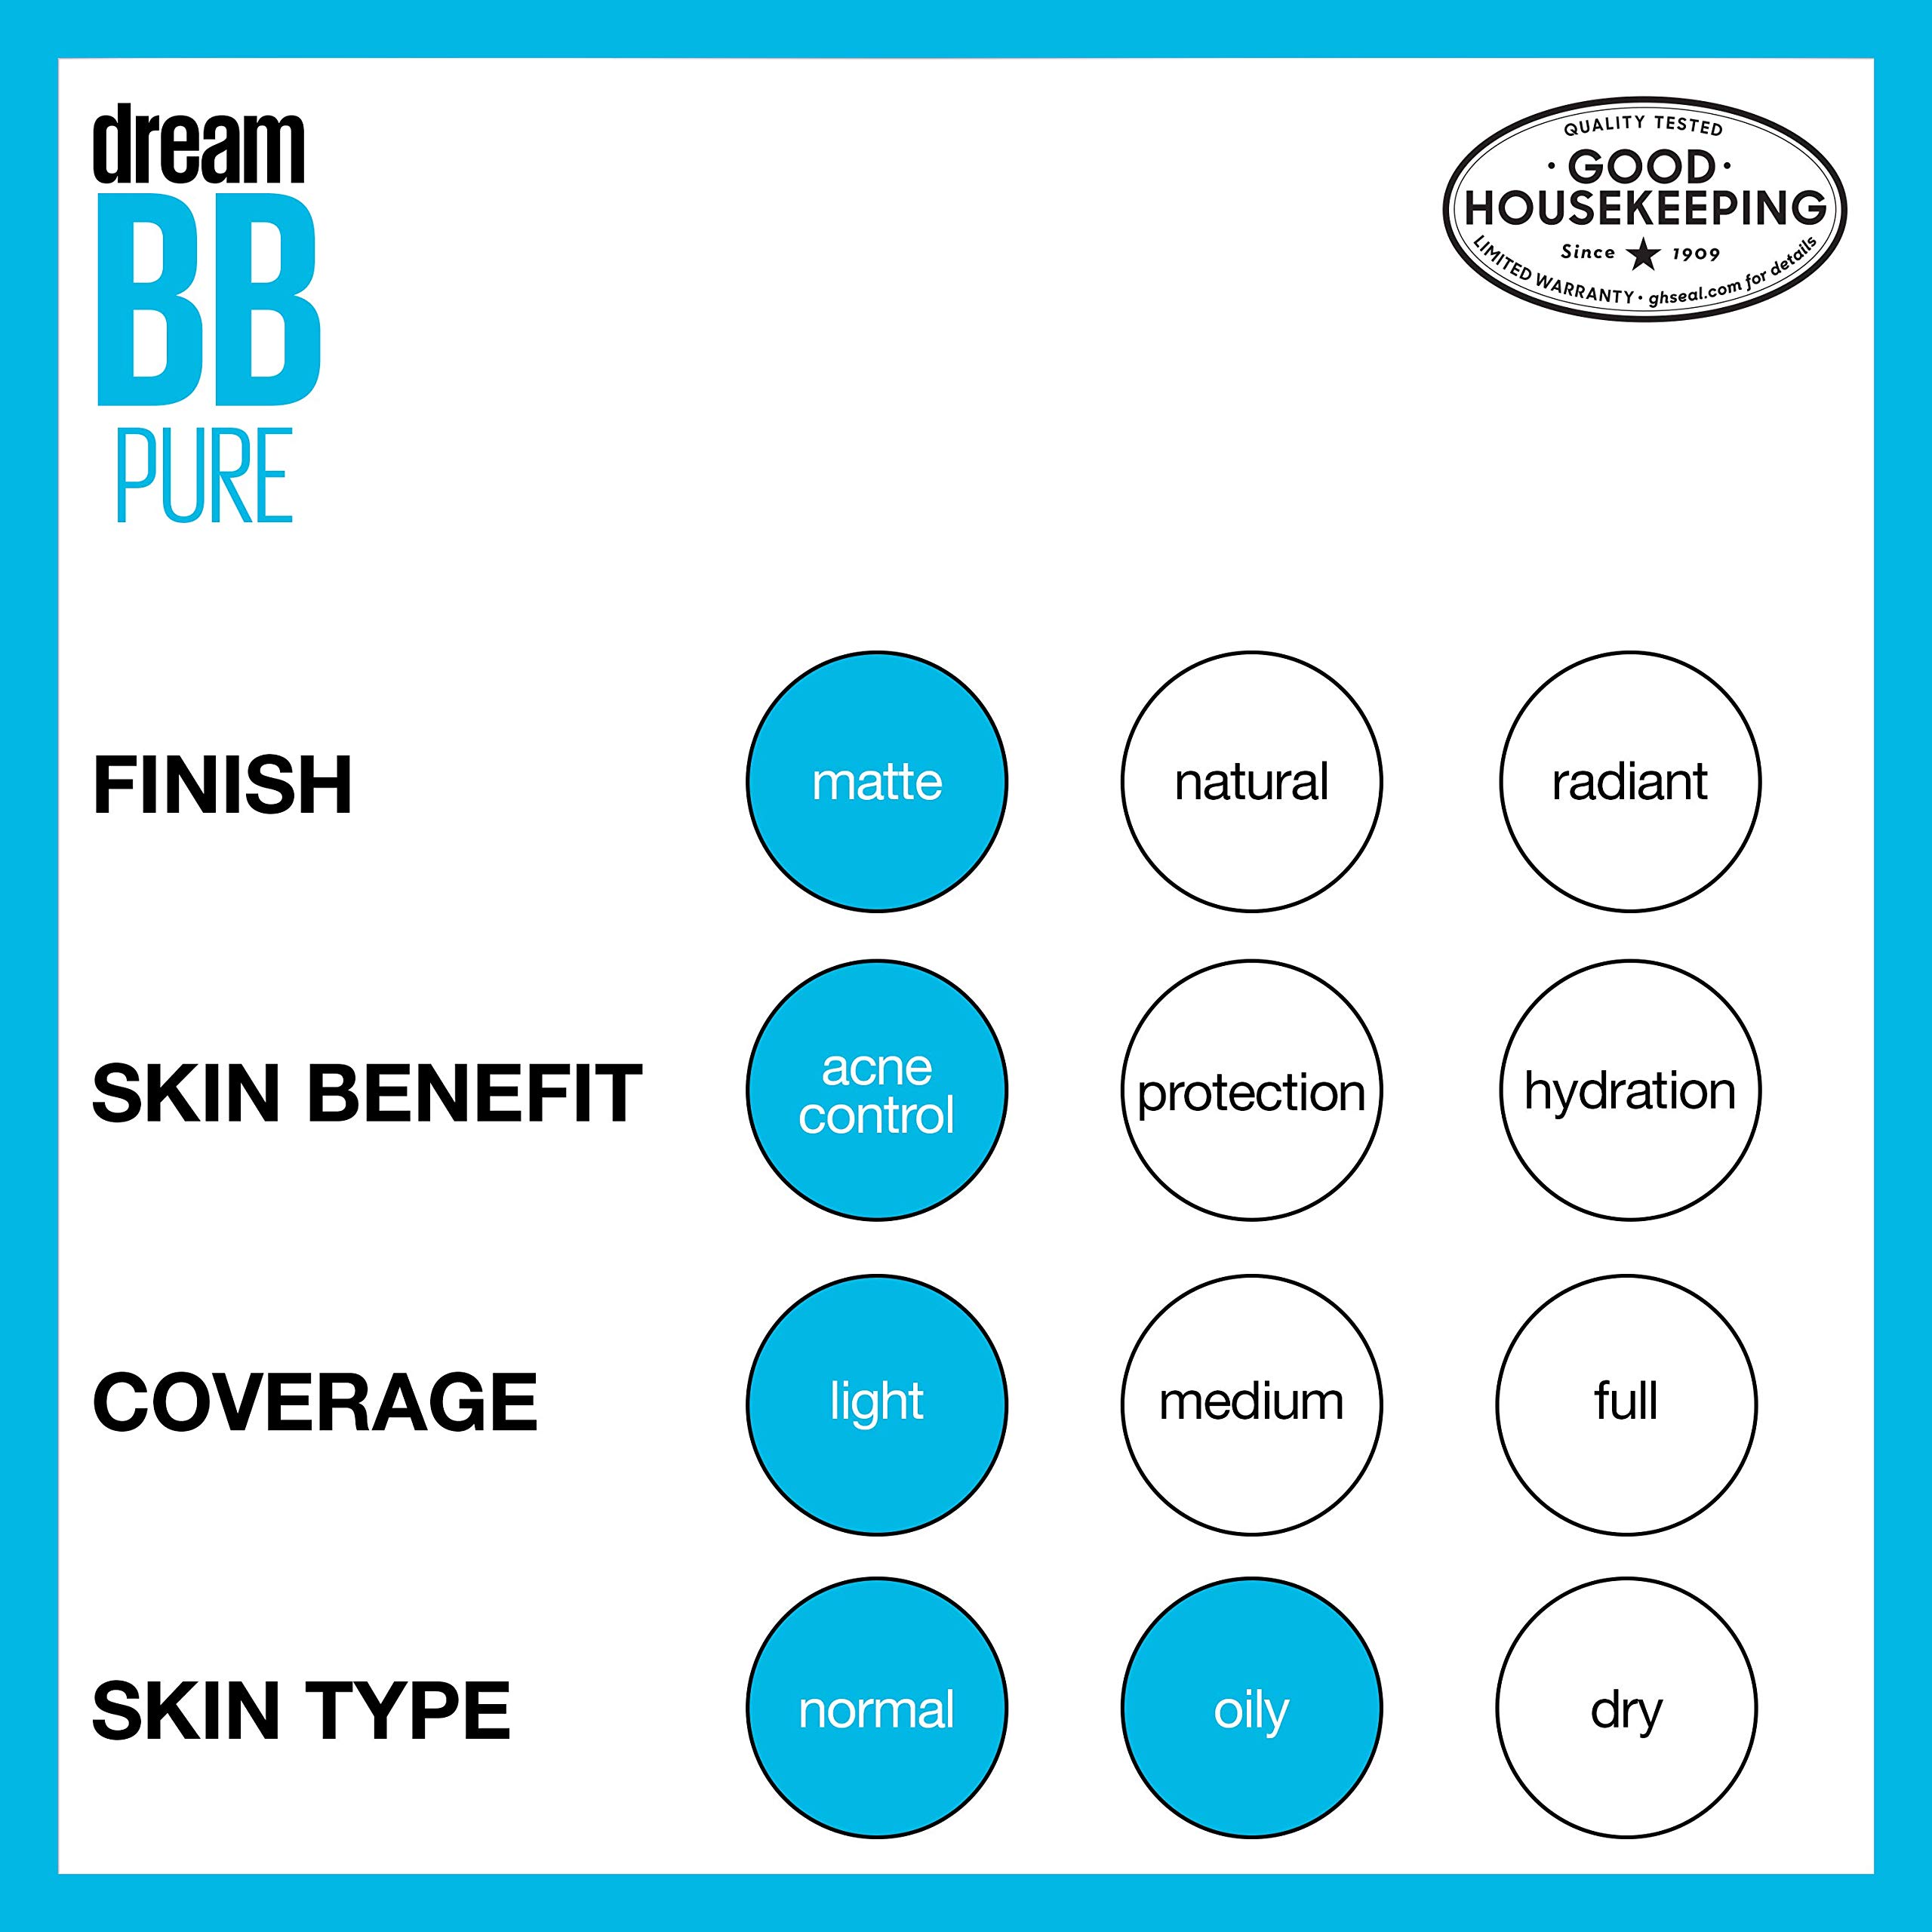 Maybelline New York Dream Pure Skin Clearing BB Cream, 8-in-1 Skin Perfecting Beauty Balm With 2% Salicylic Acid, Sheer Tint Coverage, Oil-Free, Medium, 1 Count